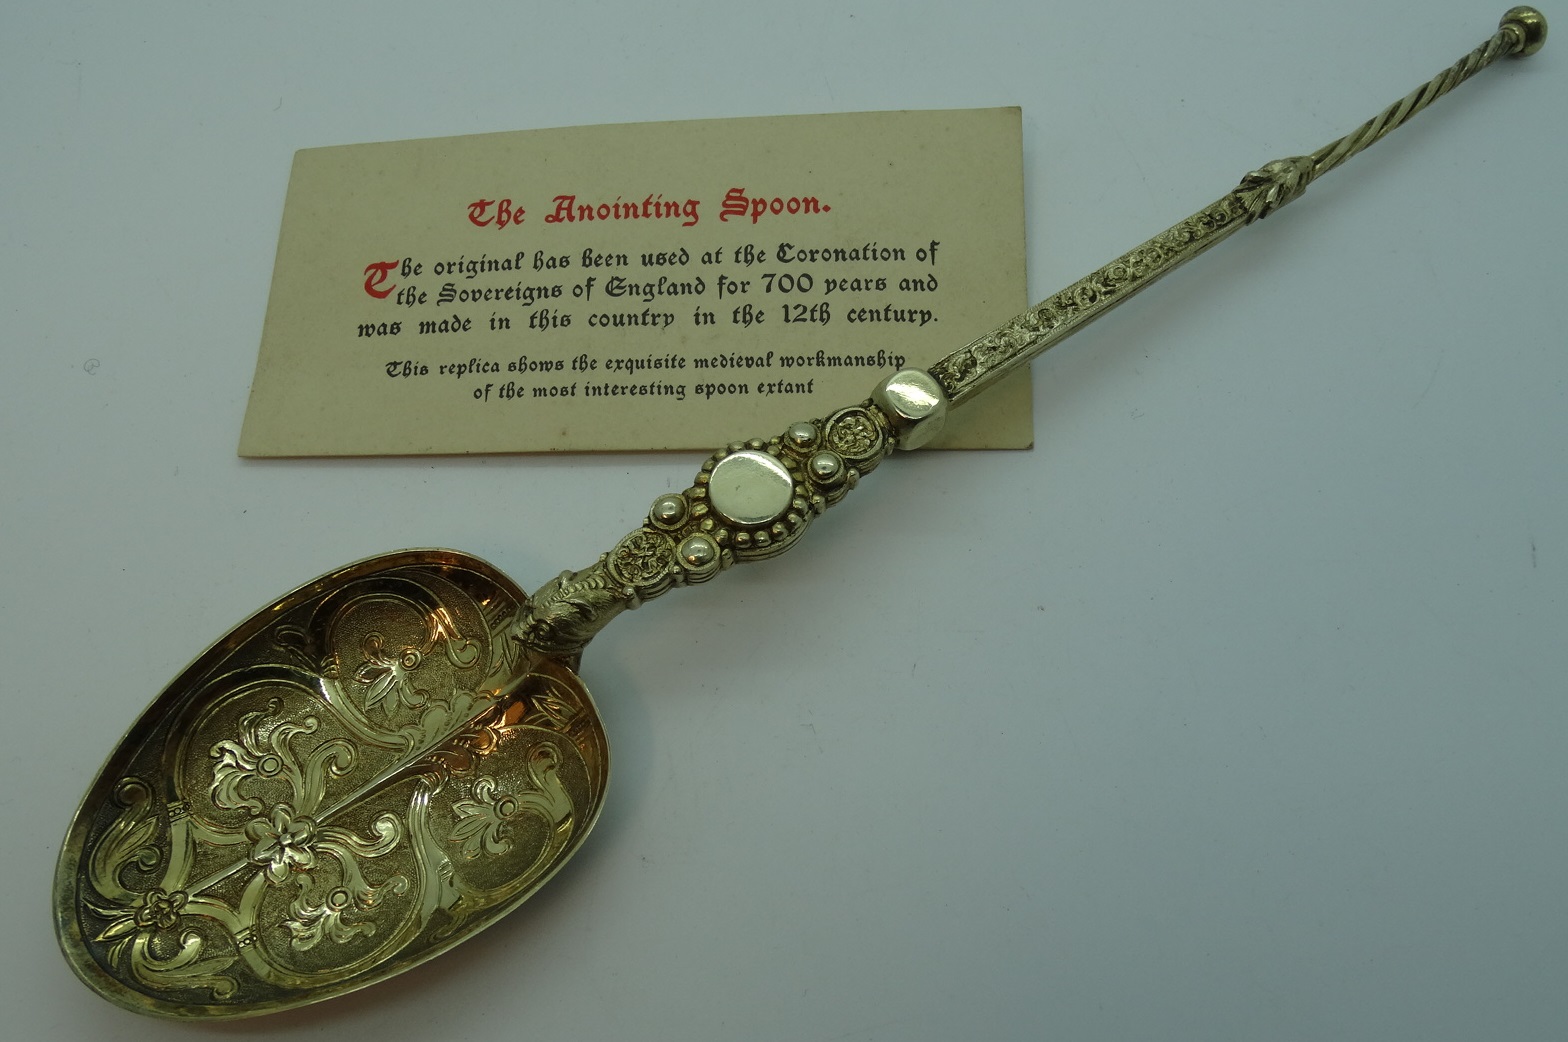 SILVER GILT REPLICA ANNOINTING SPOON